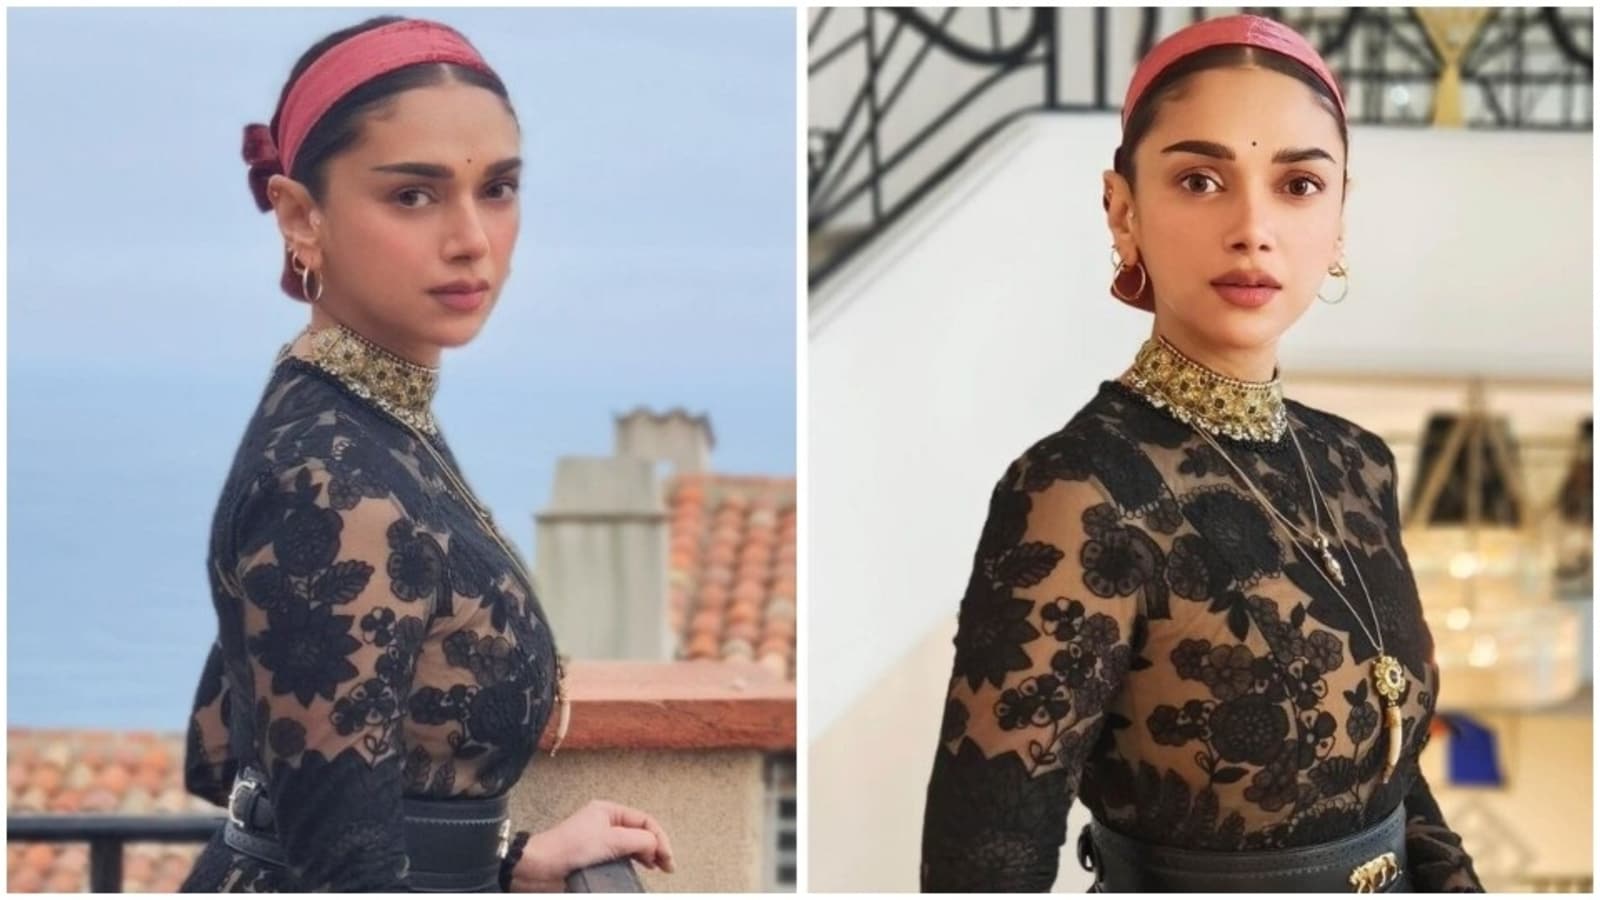 Aditi Rao Hydari’s heart is set in India as she walks at Cannes in black gown | Fashion Trends